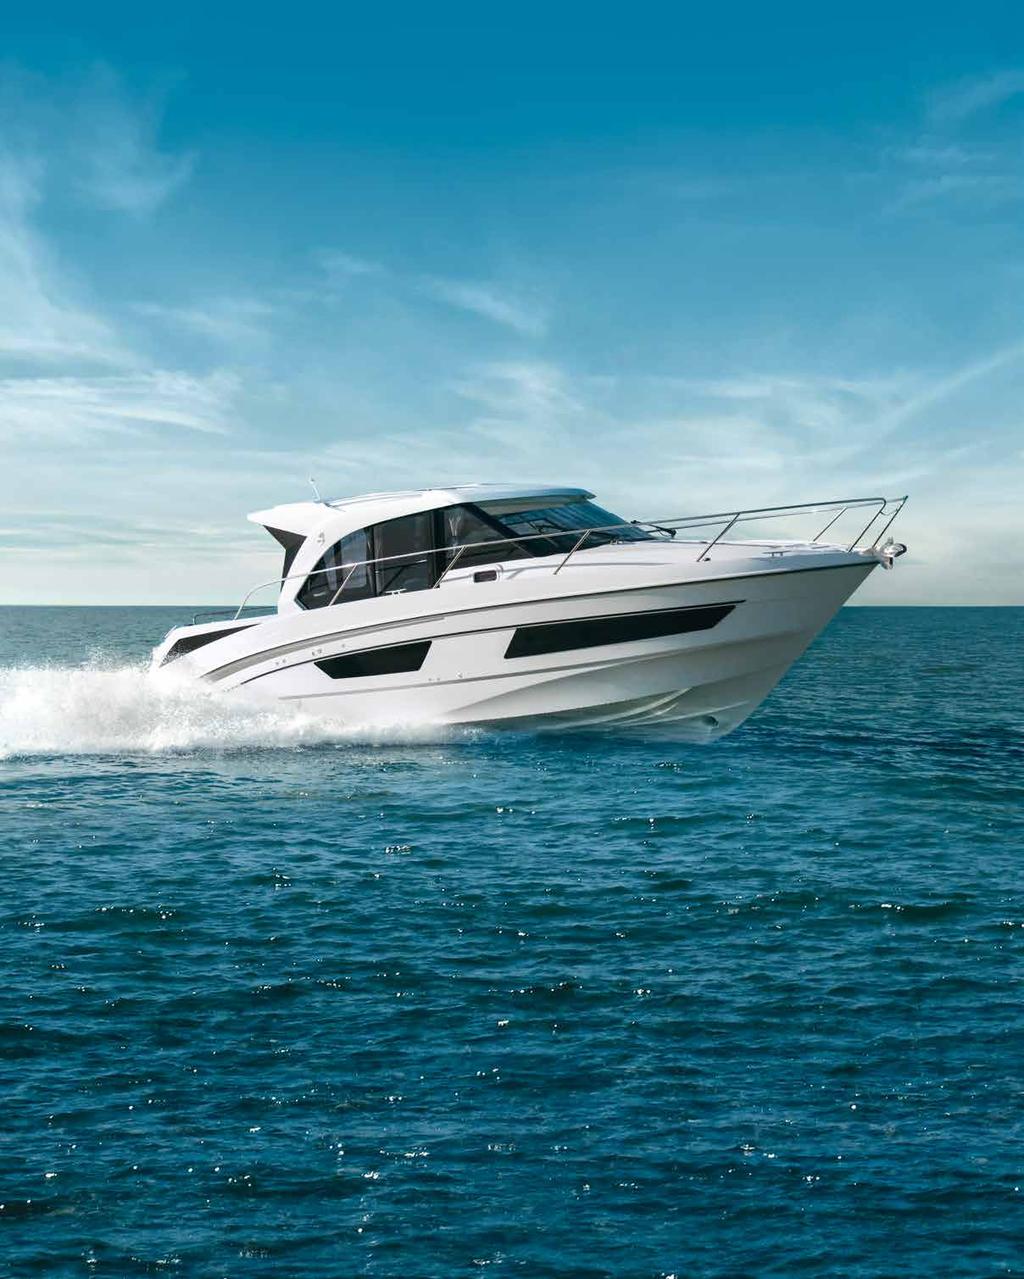 NAVAL ARCHITECT BENETEAU POWERBOATS TECHNICAL